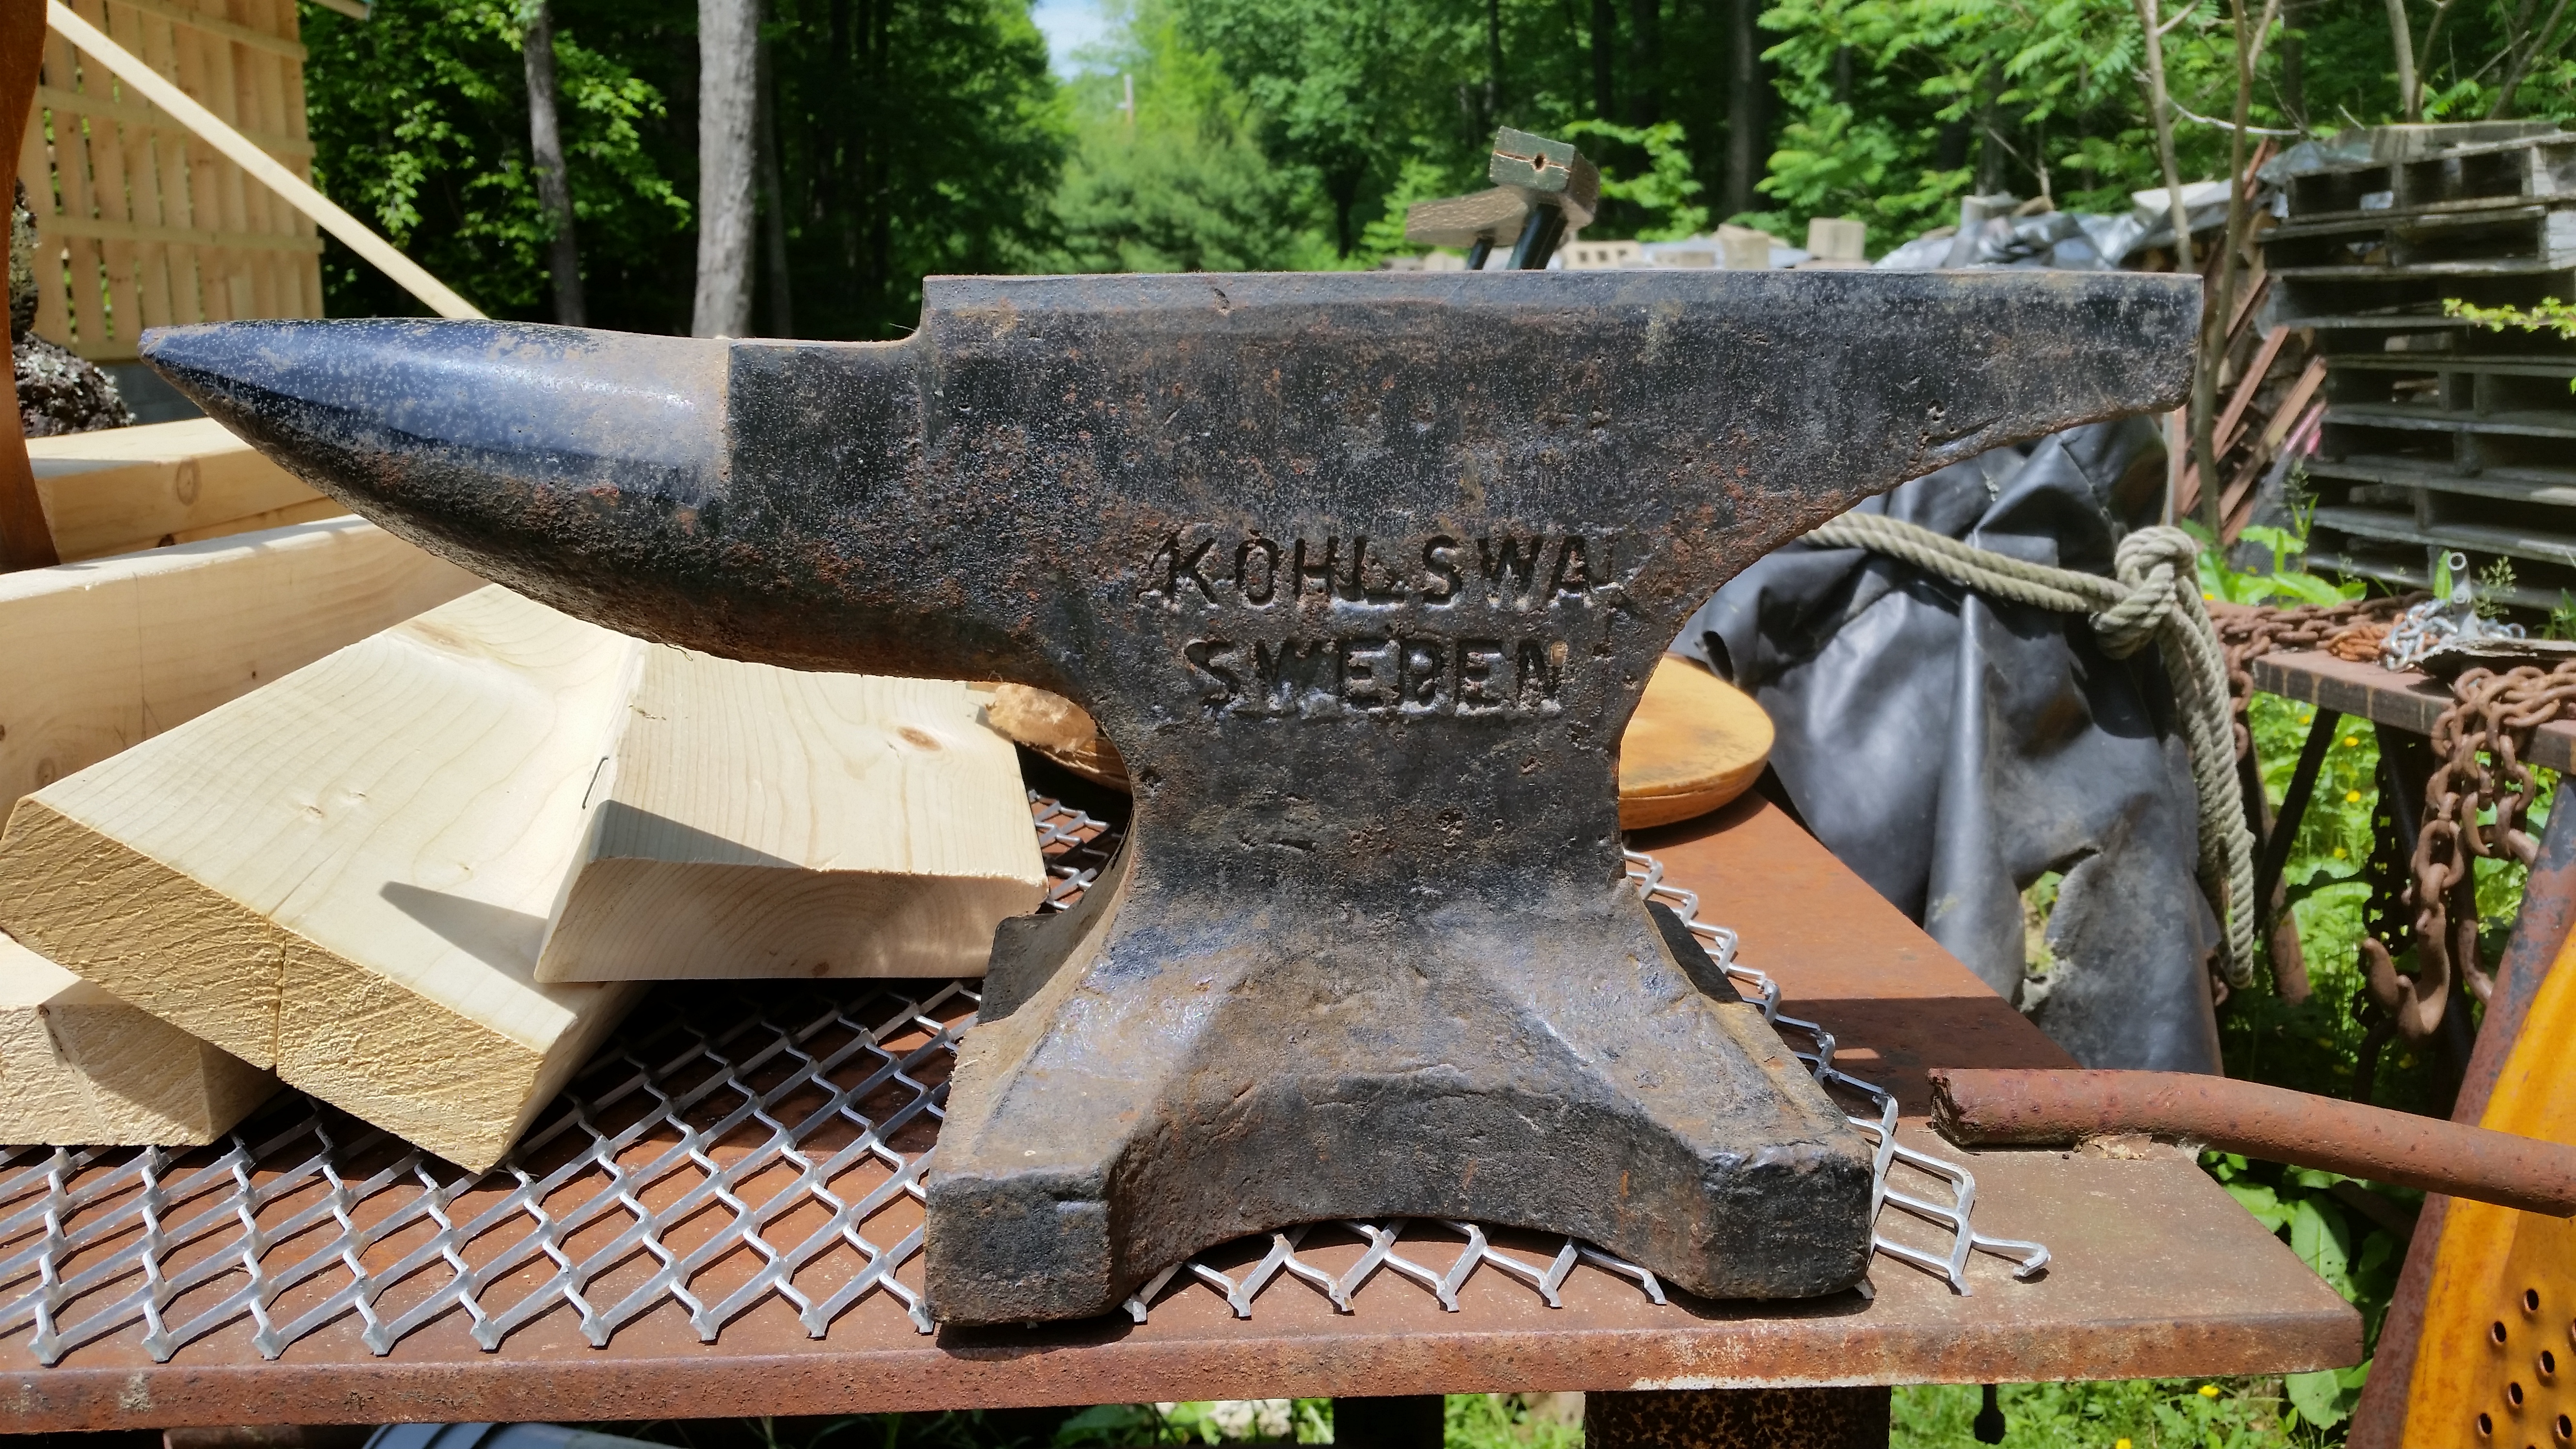 The Anvil Suggested Price For Kohlswa Anvil Type A1 71 Lbs.